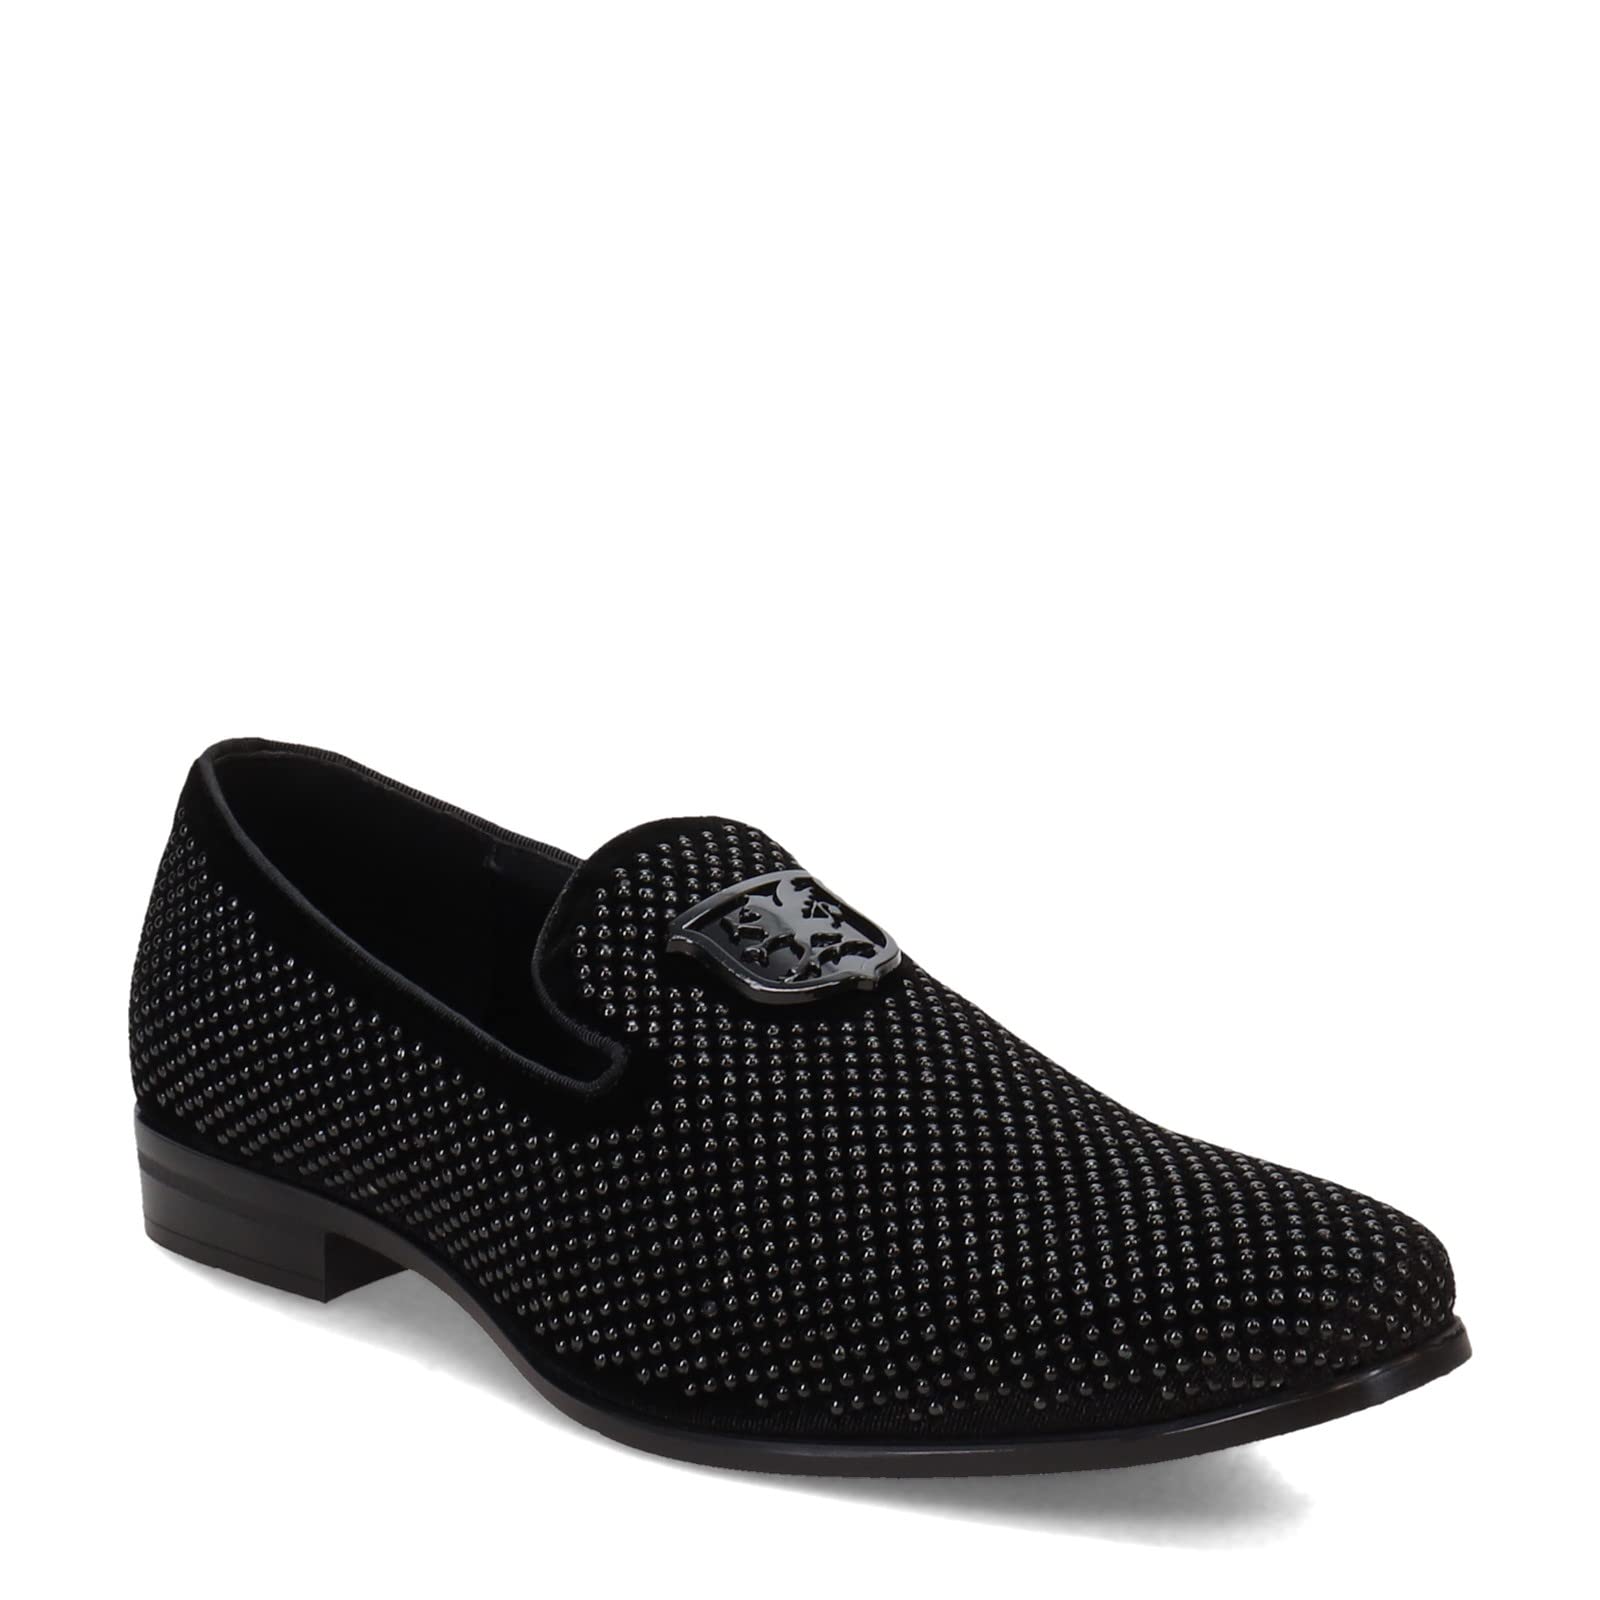 STACY ADAMS Men's, Swagger Loafer